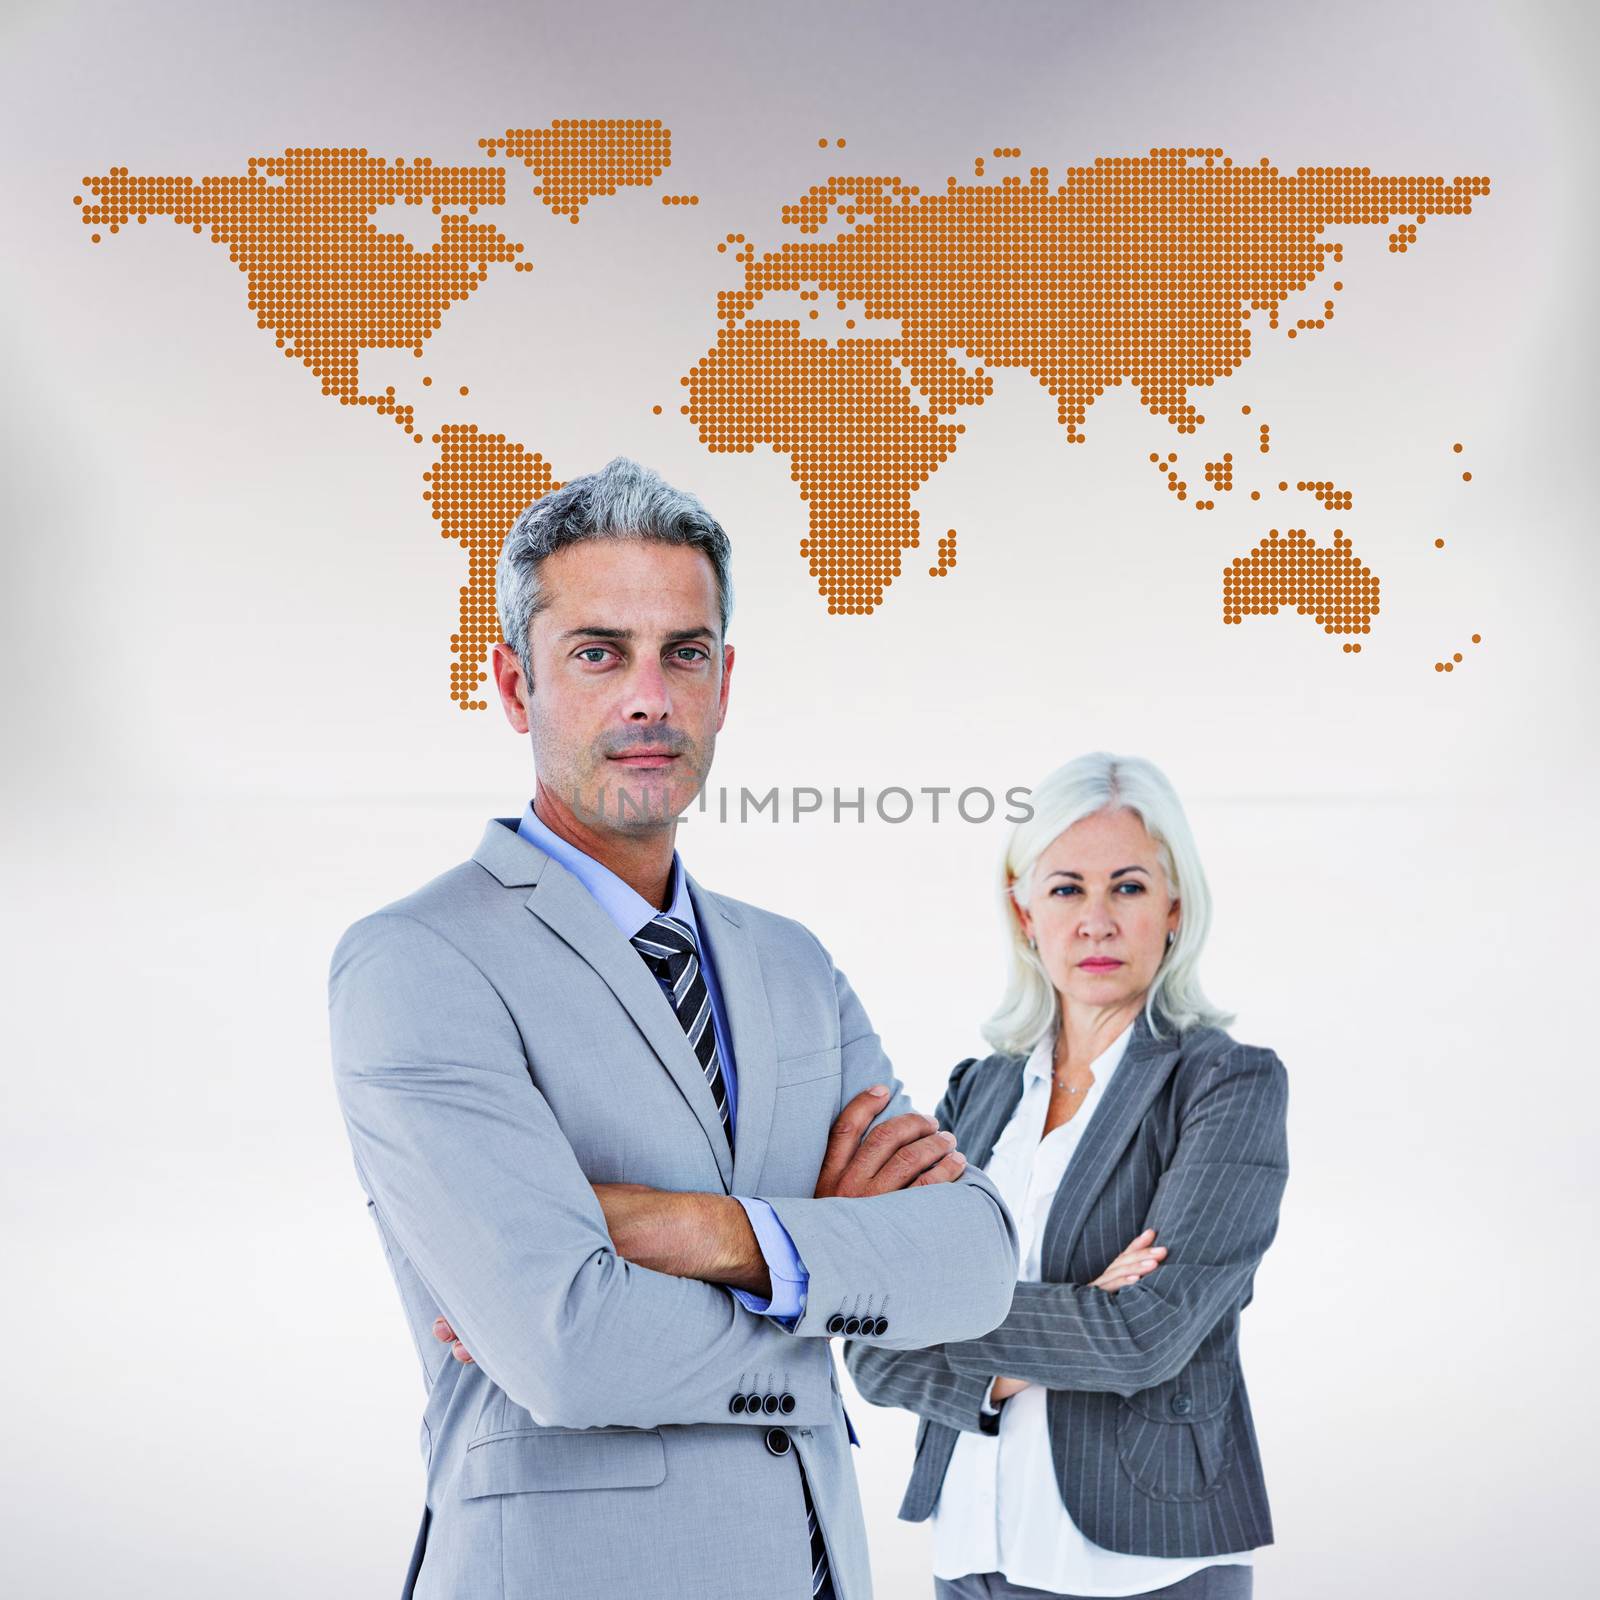  Smiling businesswoman and man with arms crossed against orange world map on white background